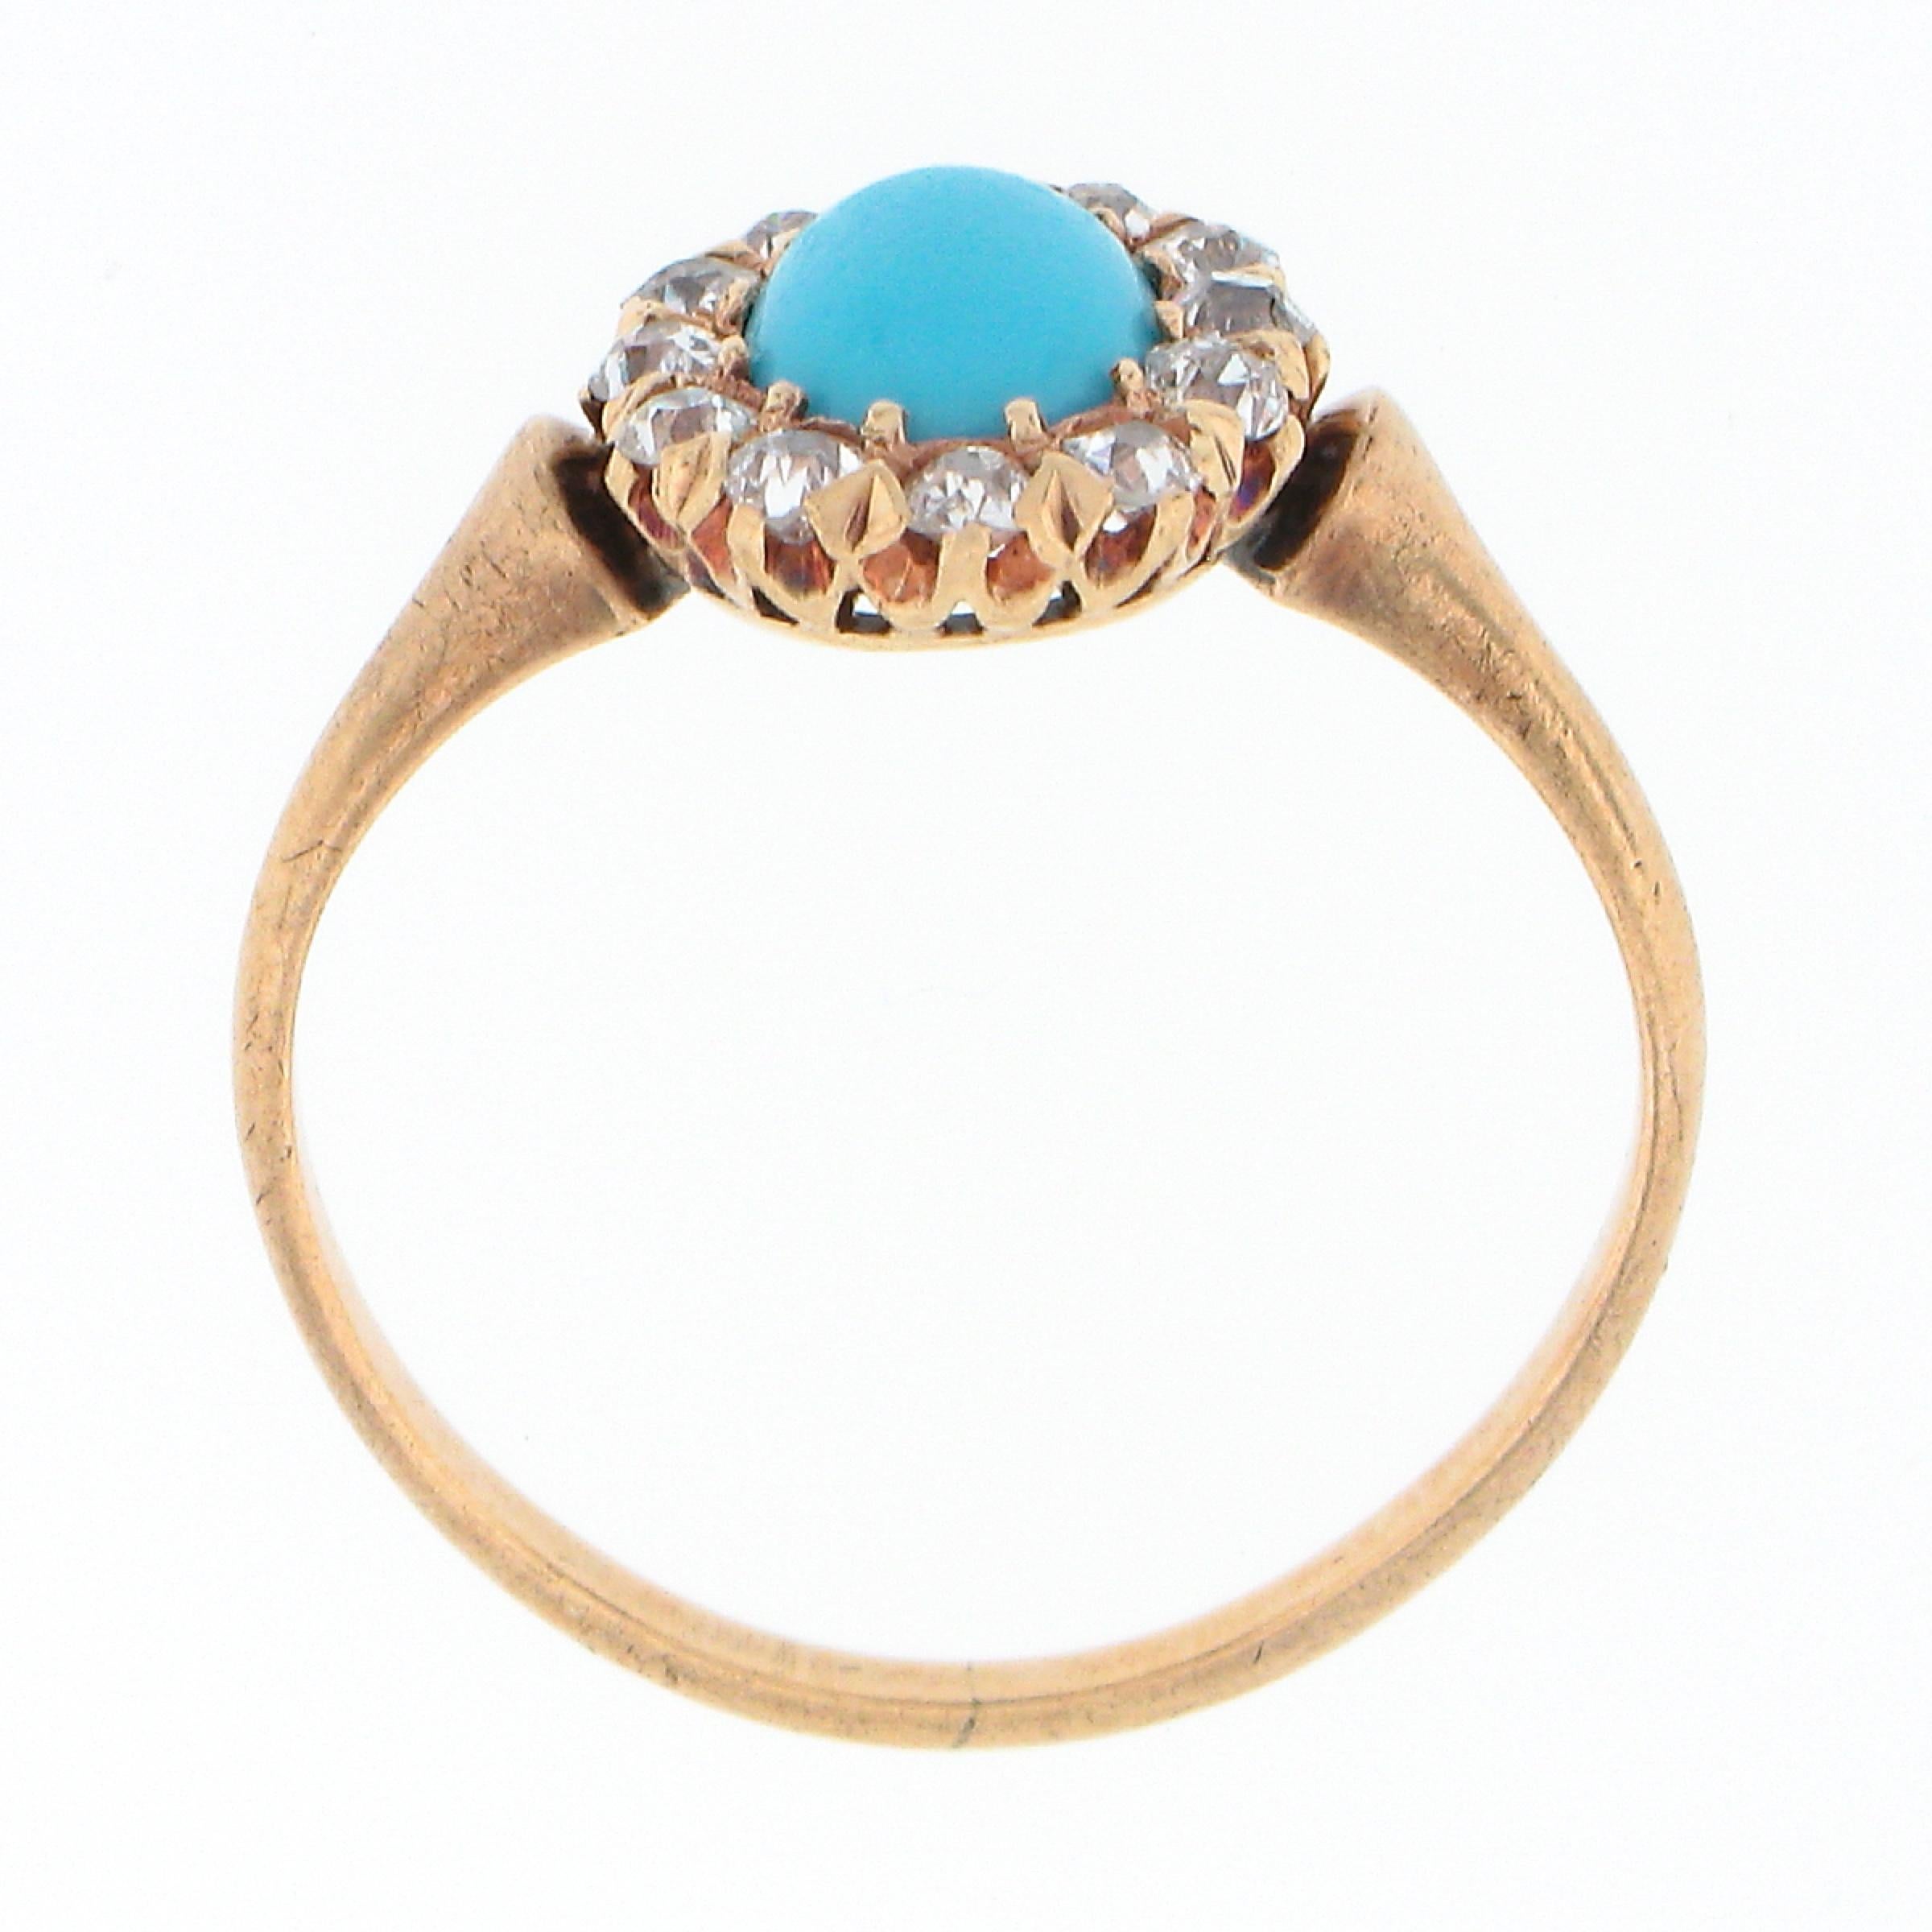 Antique Victorian 14k Gold Oval Cabochon Turquoise w/ Mine Cut Diamond Halo Ring 3